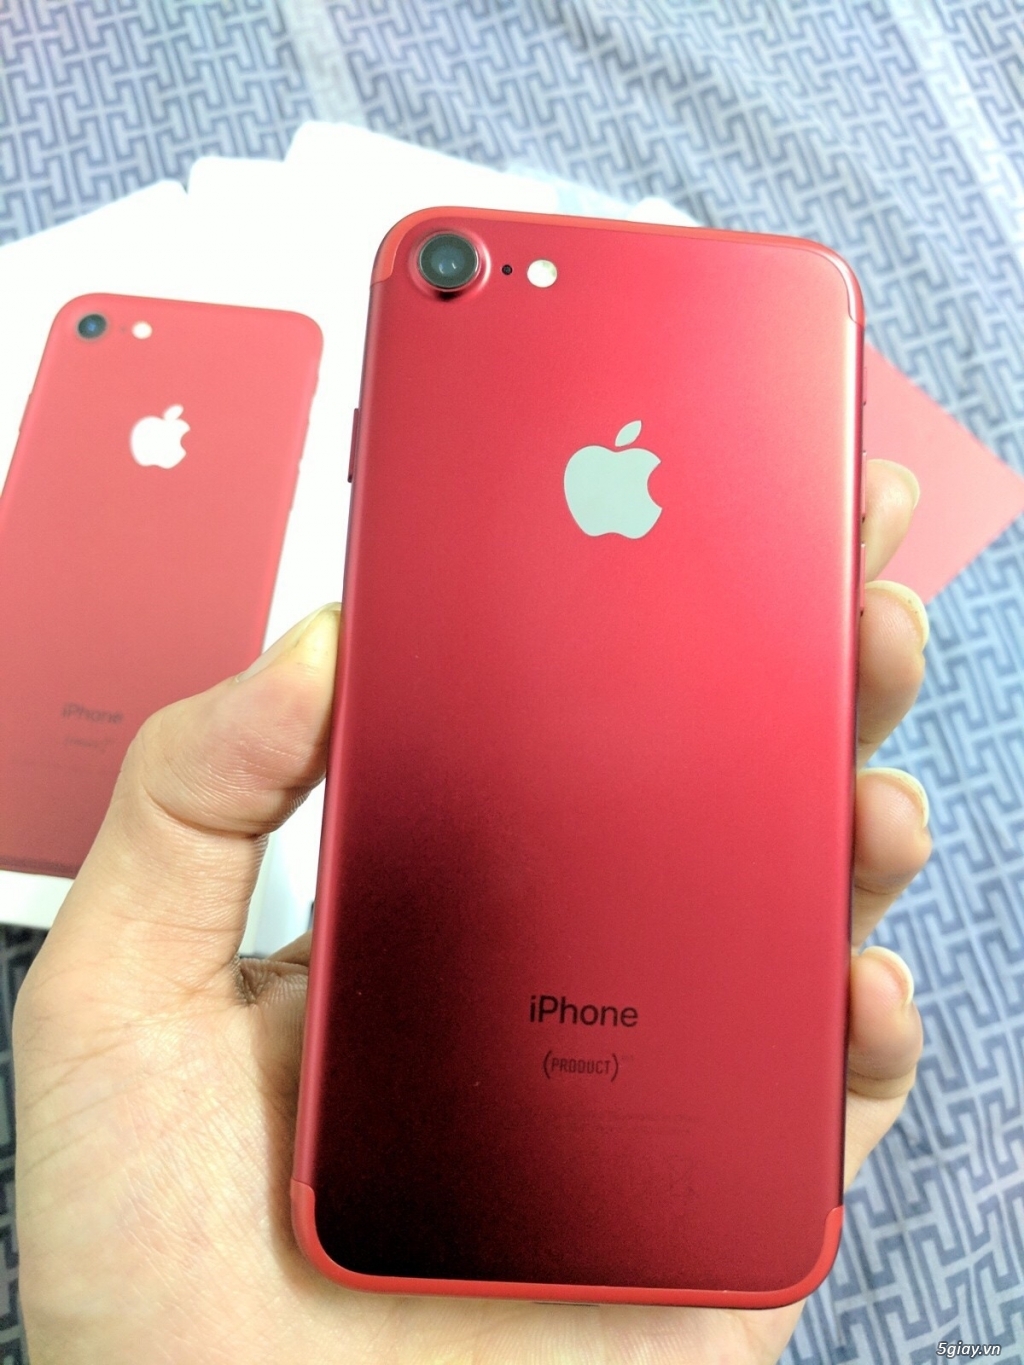 Iphone 7 - Red - 128Gb - Like new - 99% - 8